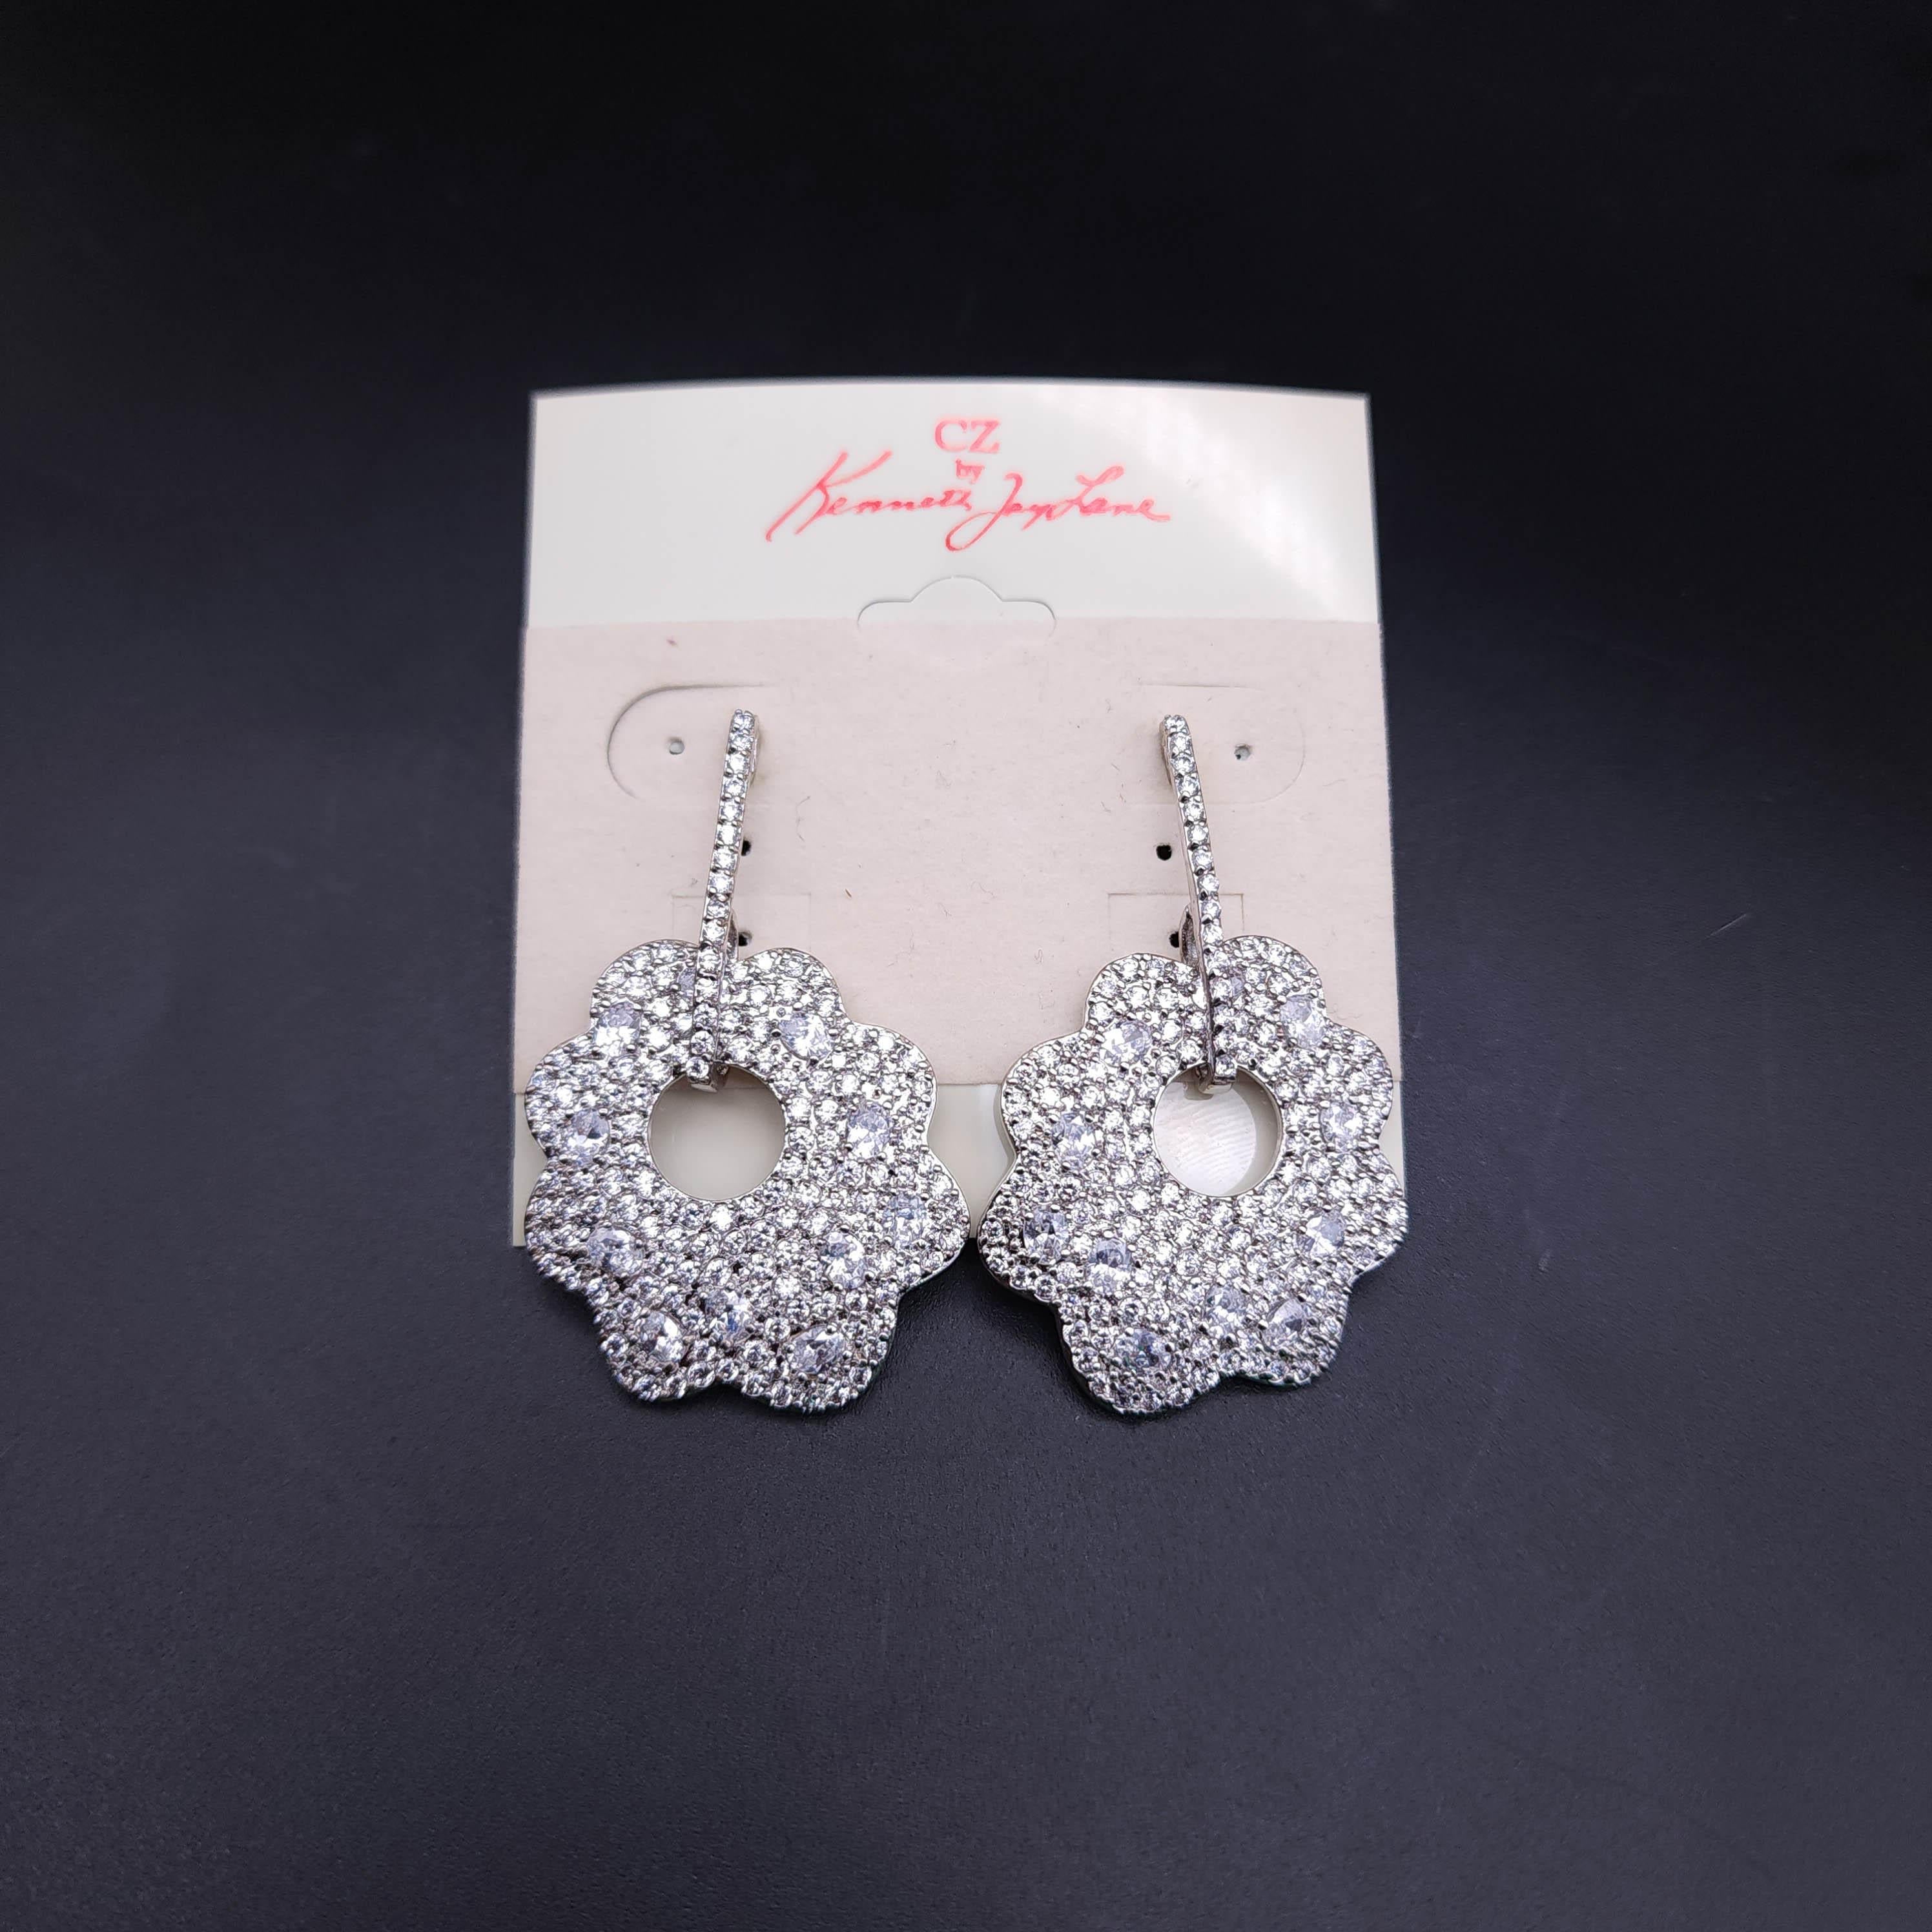 Add a touch of dazzling elegance to your jewelry collection with the Kenneth Jay Lane pave clear cubic zirconia crystal dangle floral earrings. These exquisite earrings feature a dazzling display of pave-set clear cubic zirconia crystals,